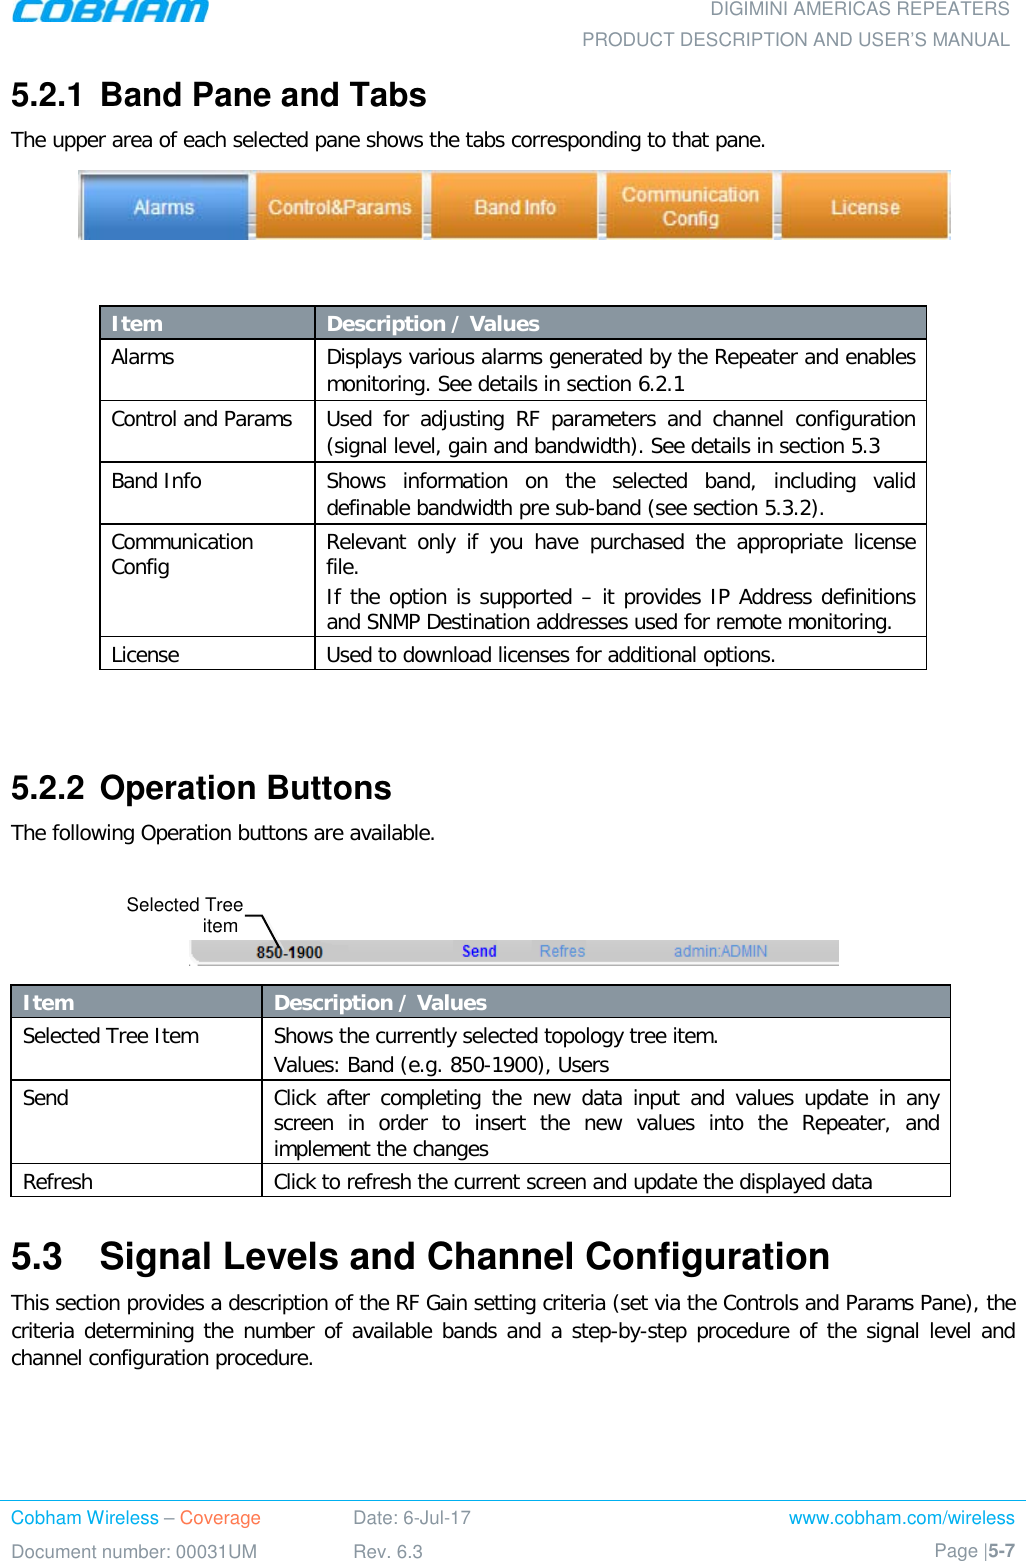  DIGIMINI AMERICAS REPEATERS PRODUCT DESCRIPTION AND USER’S MANUAL Cobham Wireless – Coverage Date: 6-Jul-17 www.cobham.com/wireless Document number: 00031UM Rev. 6.3 Page |5-7  5.2.1  Band Pane and Tabs  The upper area of each selected pane shows the tabs corresponding to that pane.     Item Description / Values Alarms Displays various alarms generated by the Repeater and enables monitoring. See details in section  6.2.1 Control and Params  Used for adjusting RF parameters and channel configuration (signal level, gain and bandwidth). See details in section  5.3 Band Info Shows information on the selected band, including valid definable bandwidth pre sub-band (see section  5.3.2). Communication Config Relevant only if you have purchased the appropriate license file. If the option is supported – it provides IP Address definitions and SNMP Destination addresses used for remote monitoring. License Used to download licenses for additional options.   5.2.2  Operation Buttons The following Operation buttons are available.    Item Description / Values Selected Tree Item Shows the currently selected topology tree item. Values: Band (e.g. 850-1900), Users Send Click after completing the new data input and values update in any screen in order to insert the new values into the Repeater, and implement the changes Refresh  Click to refresh the current screen and update the displayed data  5.3  Signal Levels and Channel Configuration This section provides a description of the RF Gain setting criteria (set via the Controls and Params Pane), the criteria determining the number of available bands and a step-by-step procedure of the signal level and channel configuration procedure. Selected Tree item  